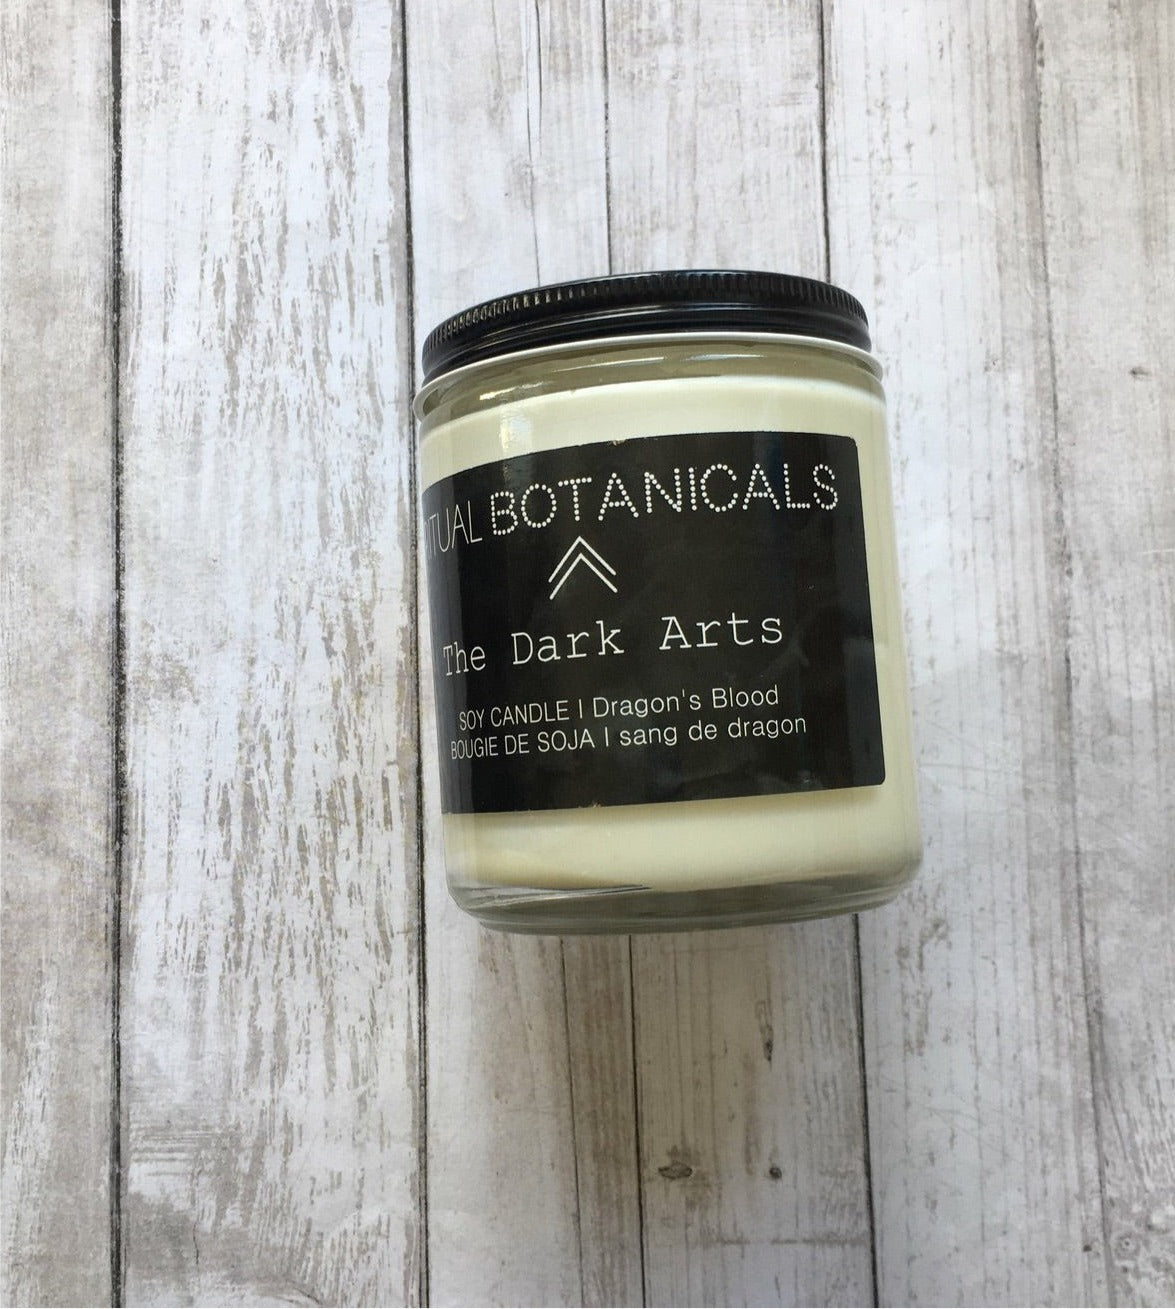 The Dark Arts Opium & Spice Soy Candle